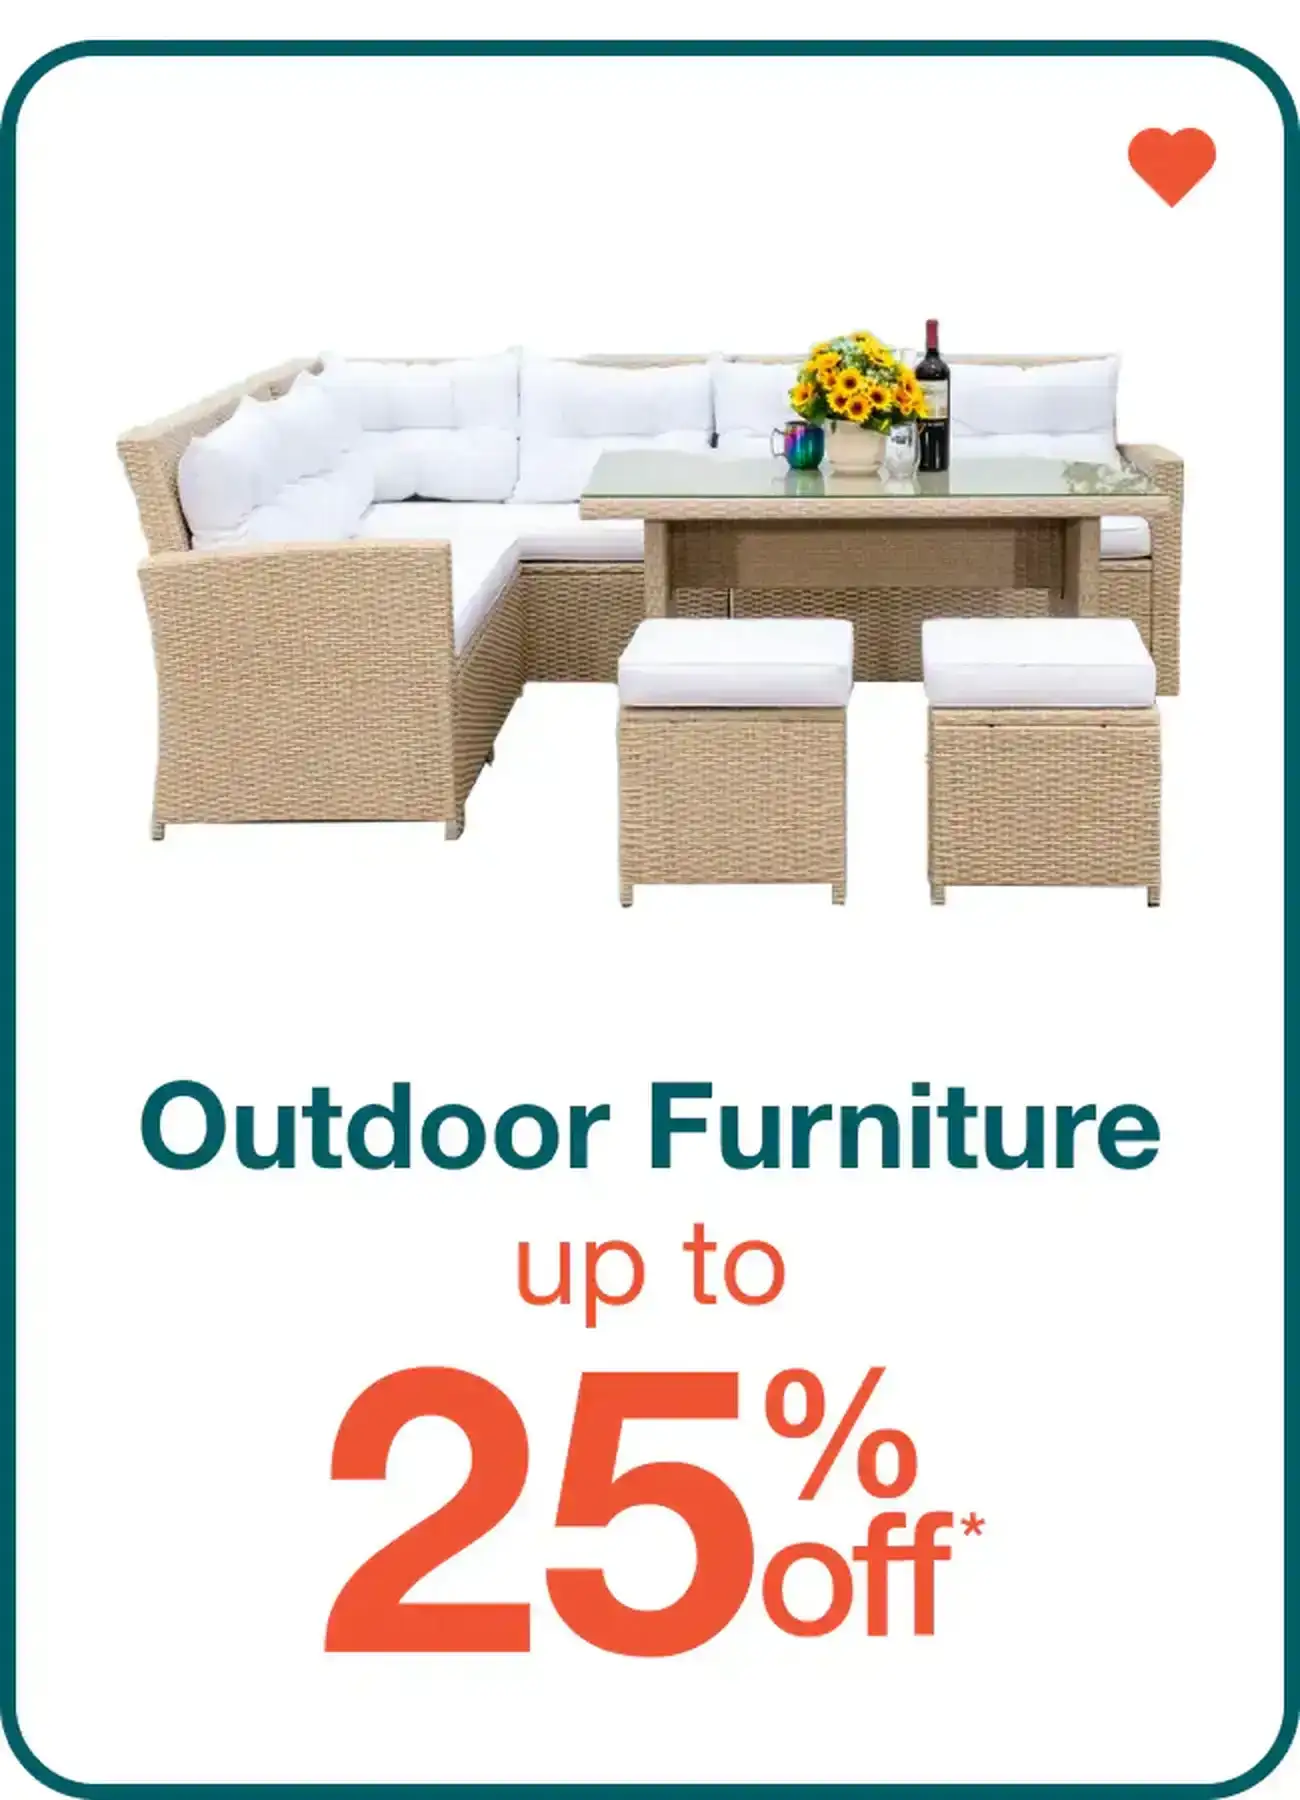 Up to 25% Off Patio Furniture